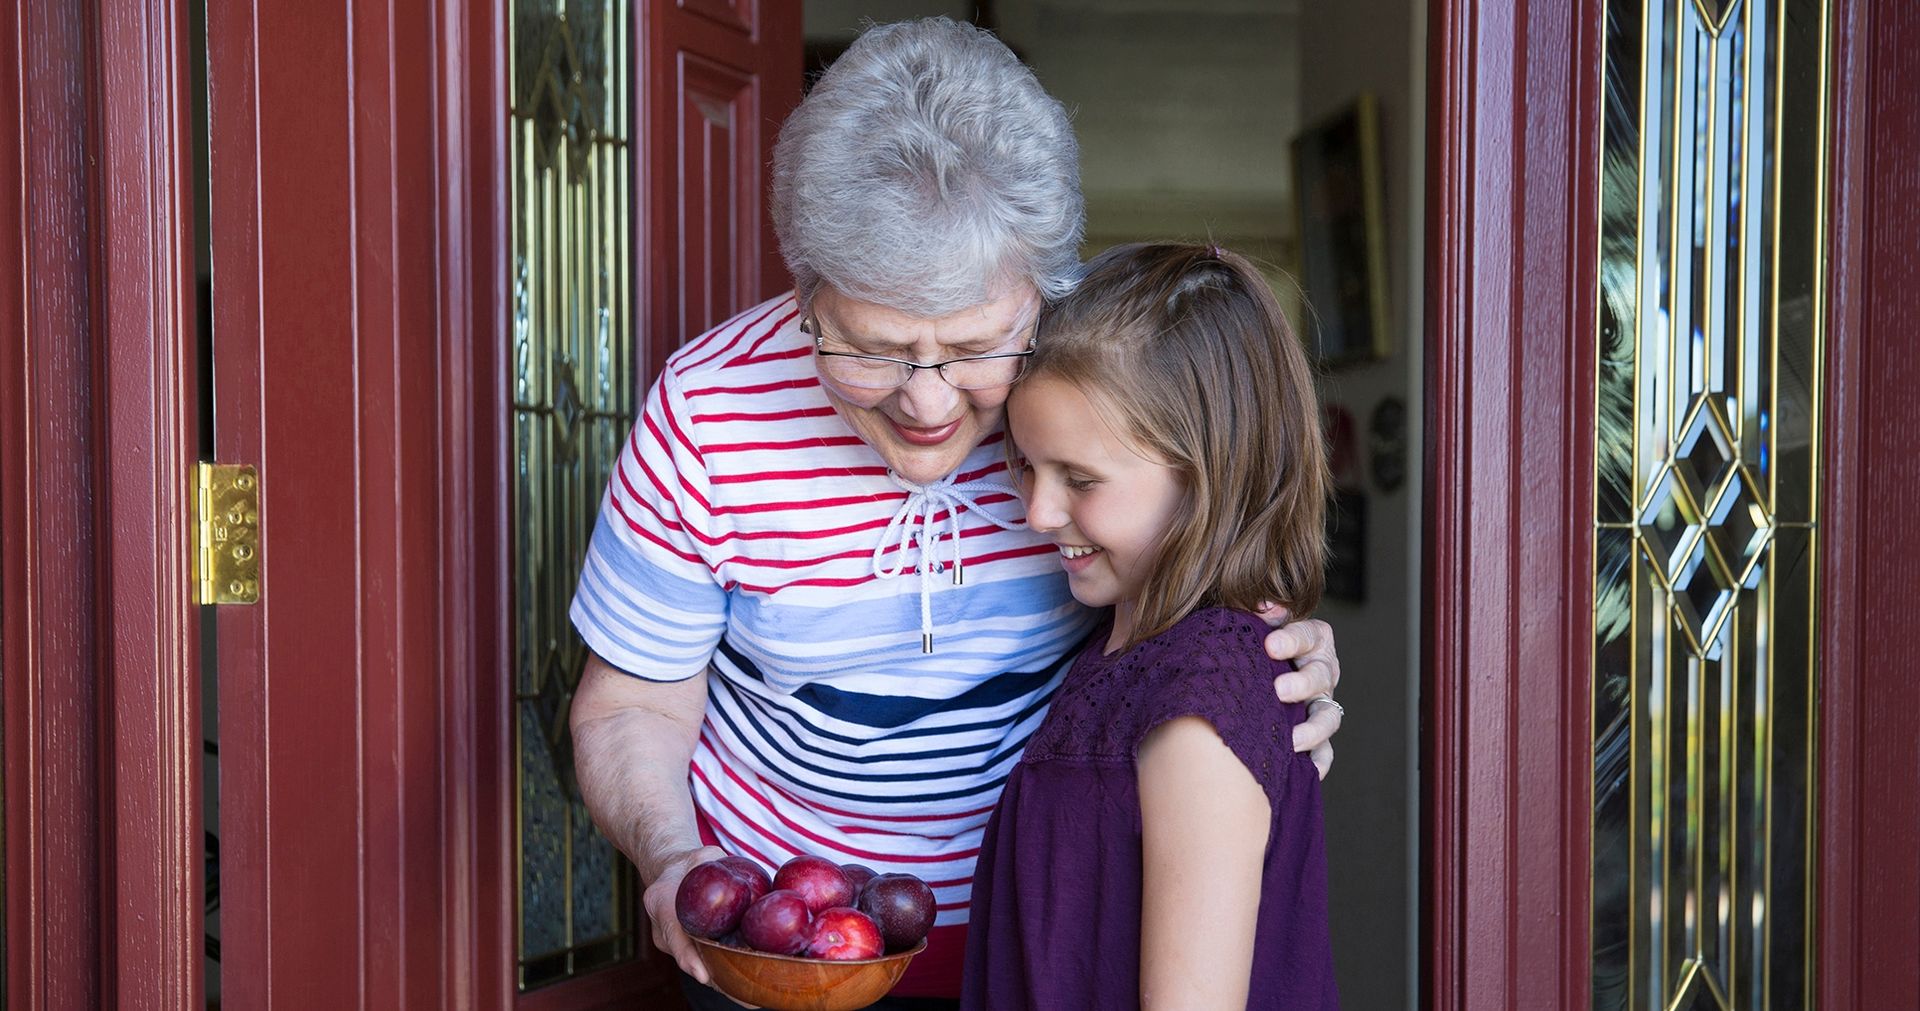 Granddaughter handing her grandmother some freshly picked plums.